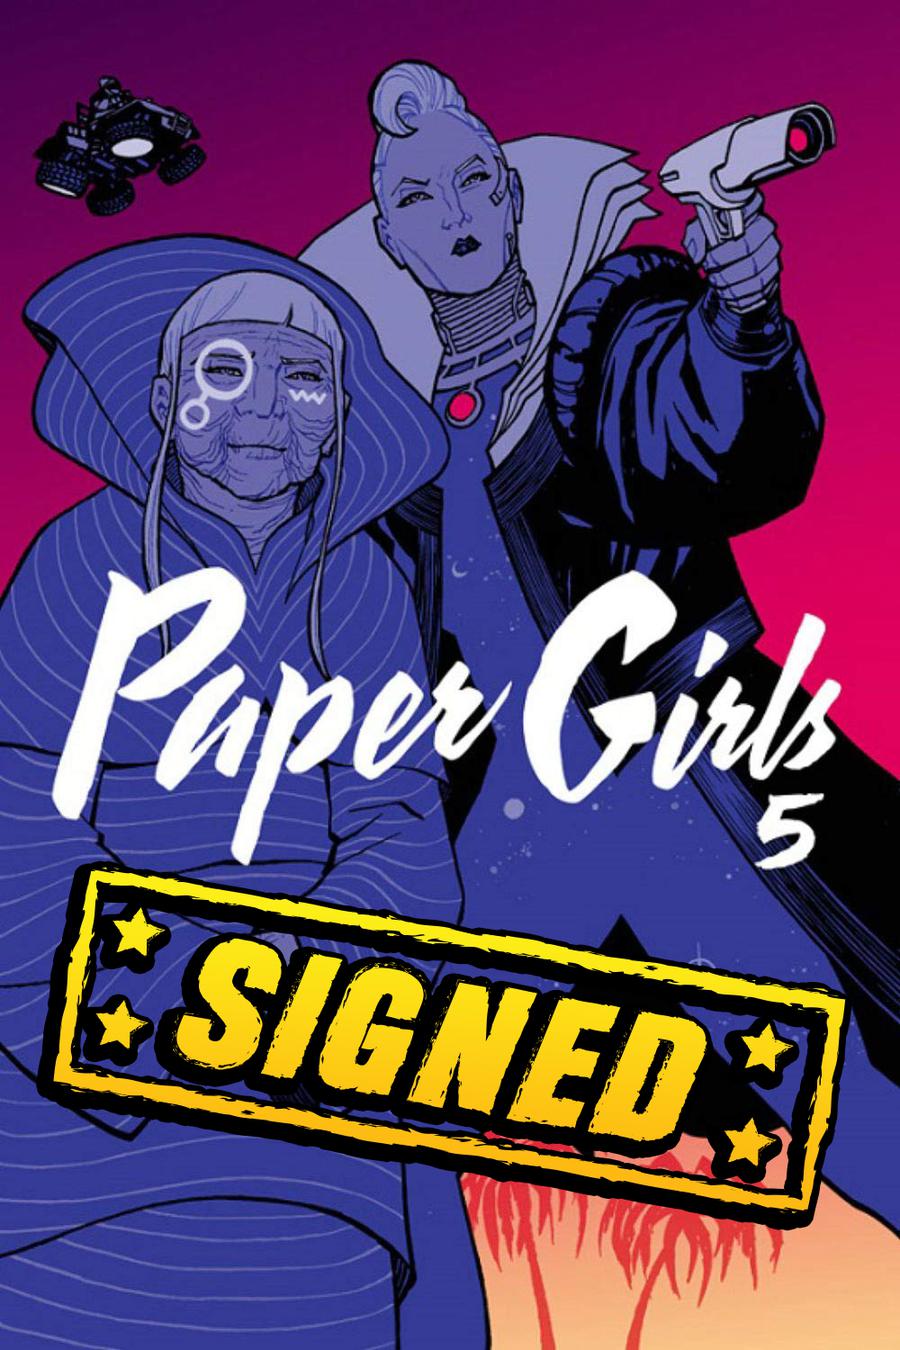 Paper Girls Vol 5 TP Signed By Brian K Vaughan & Cliff Chiang